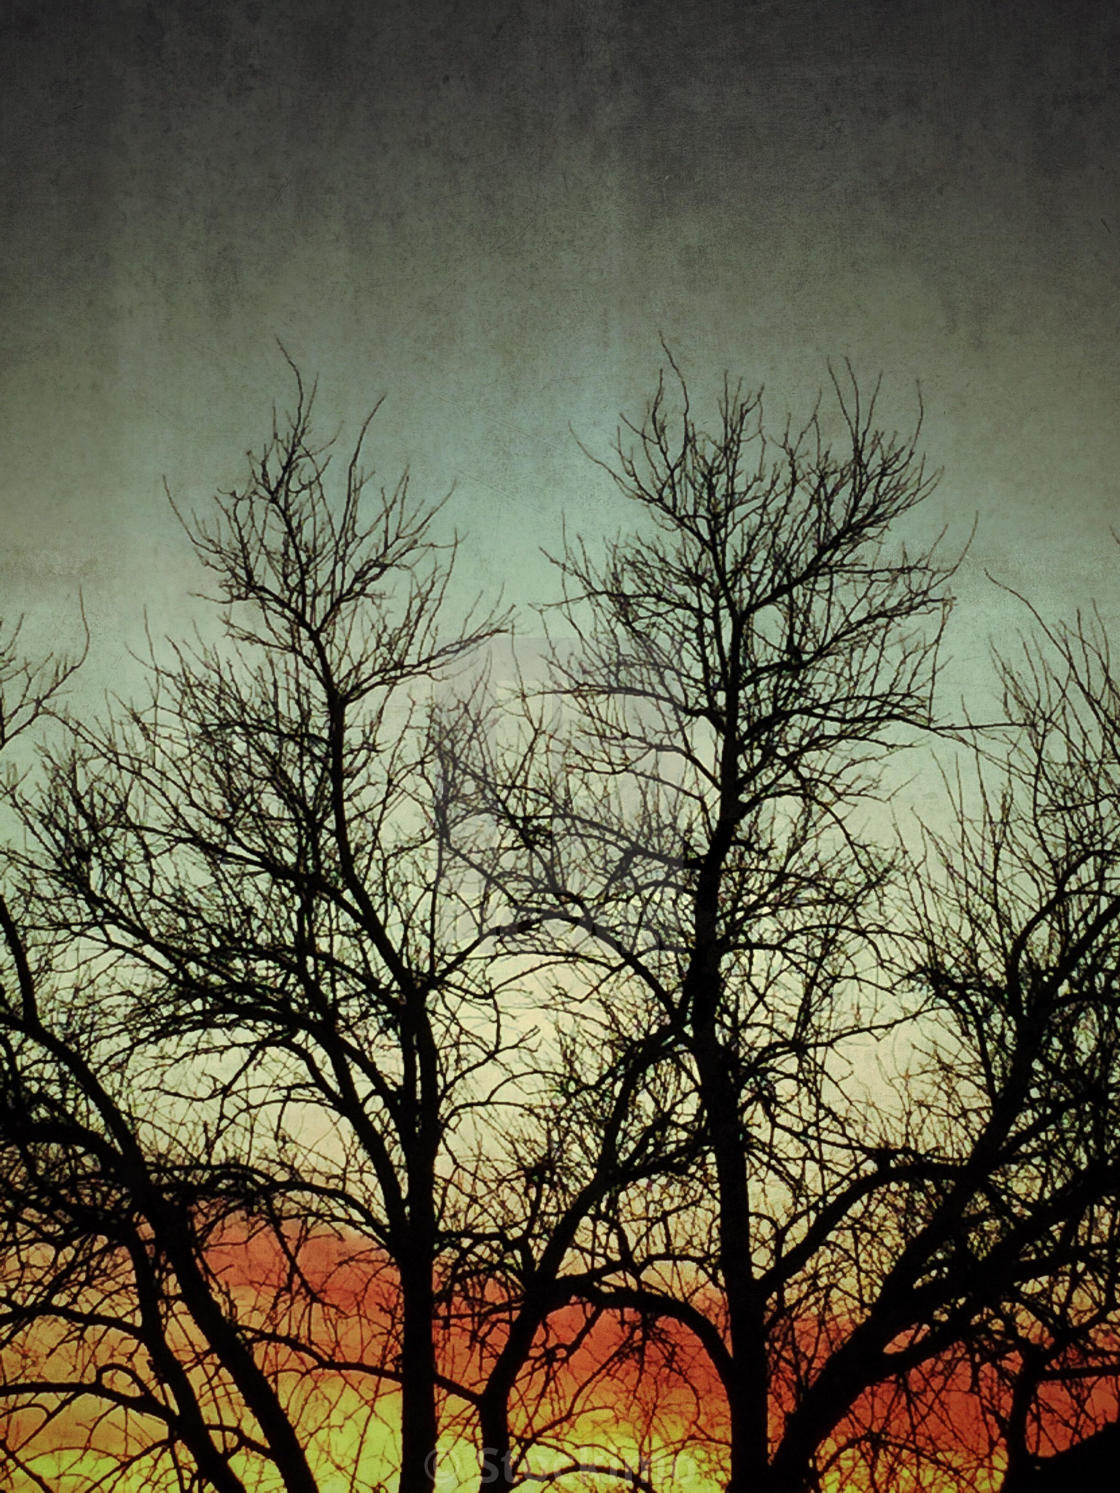 Tree Silhouette In Winter Sunset Wallpapers